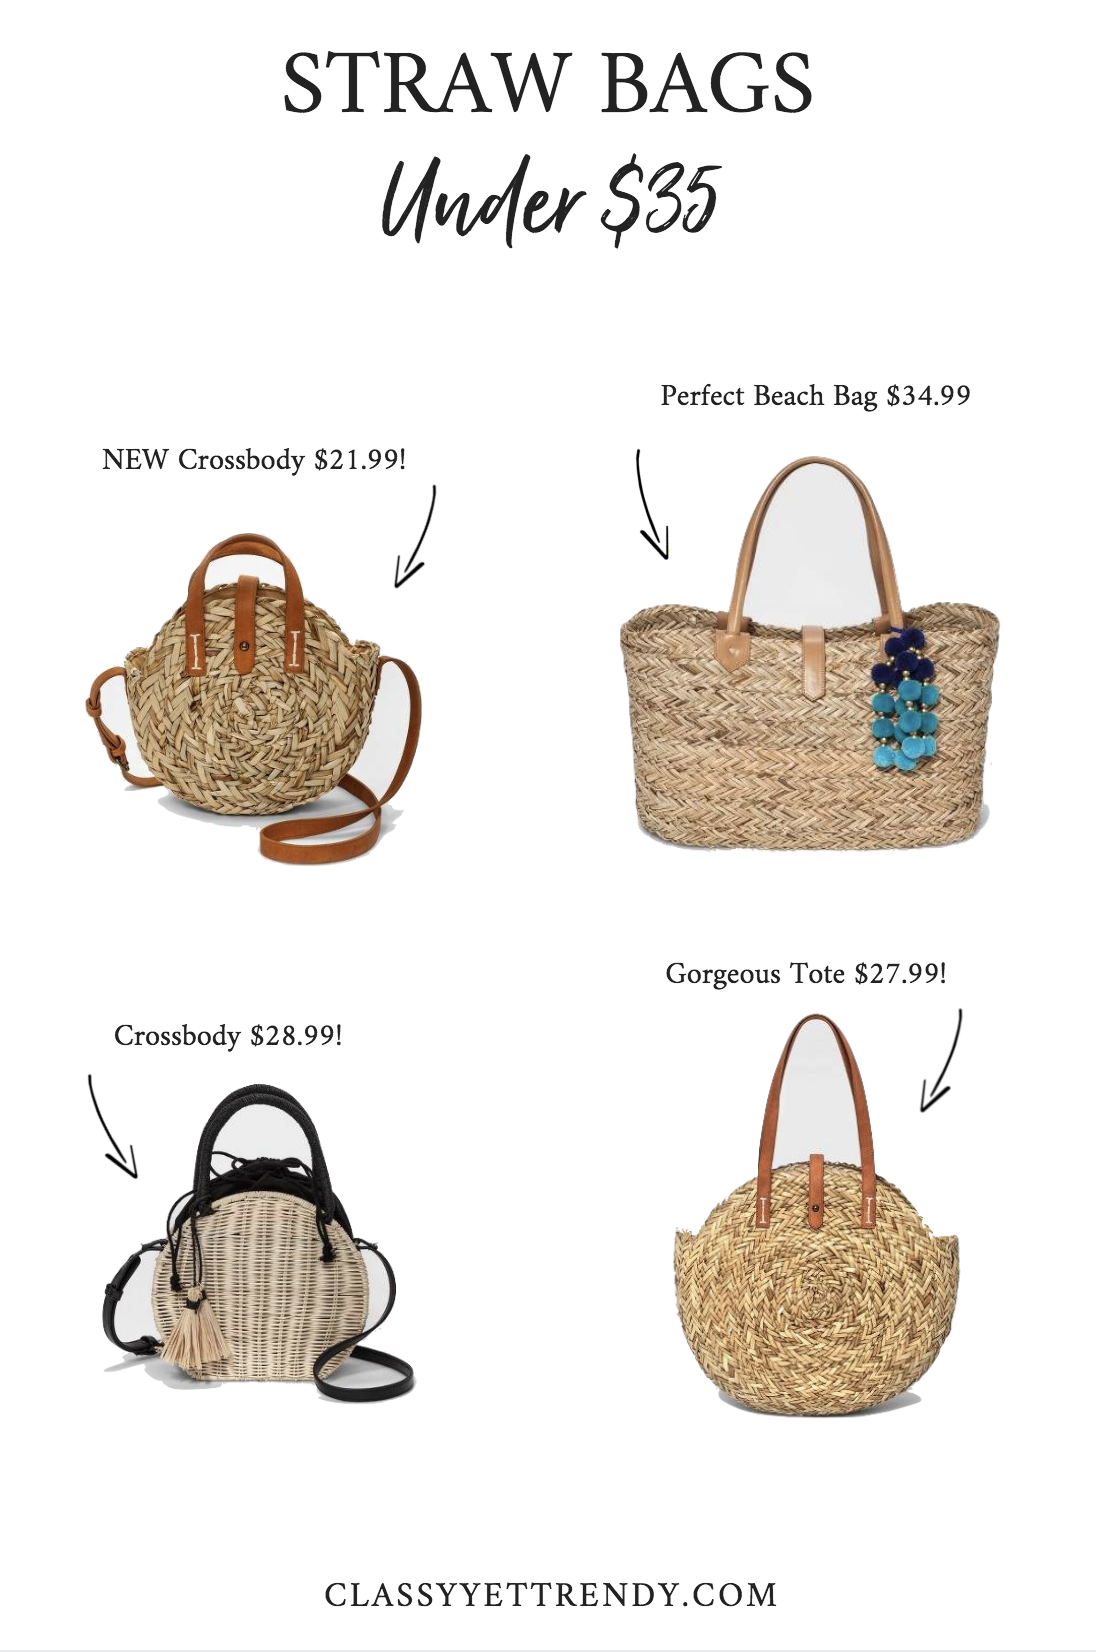 STRAW BAGS UNDER $35